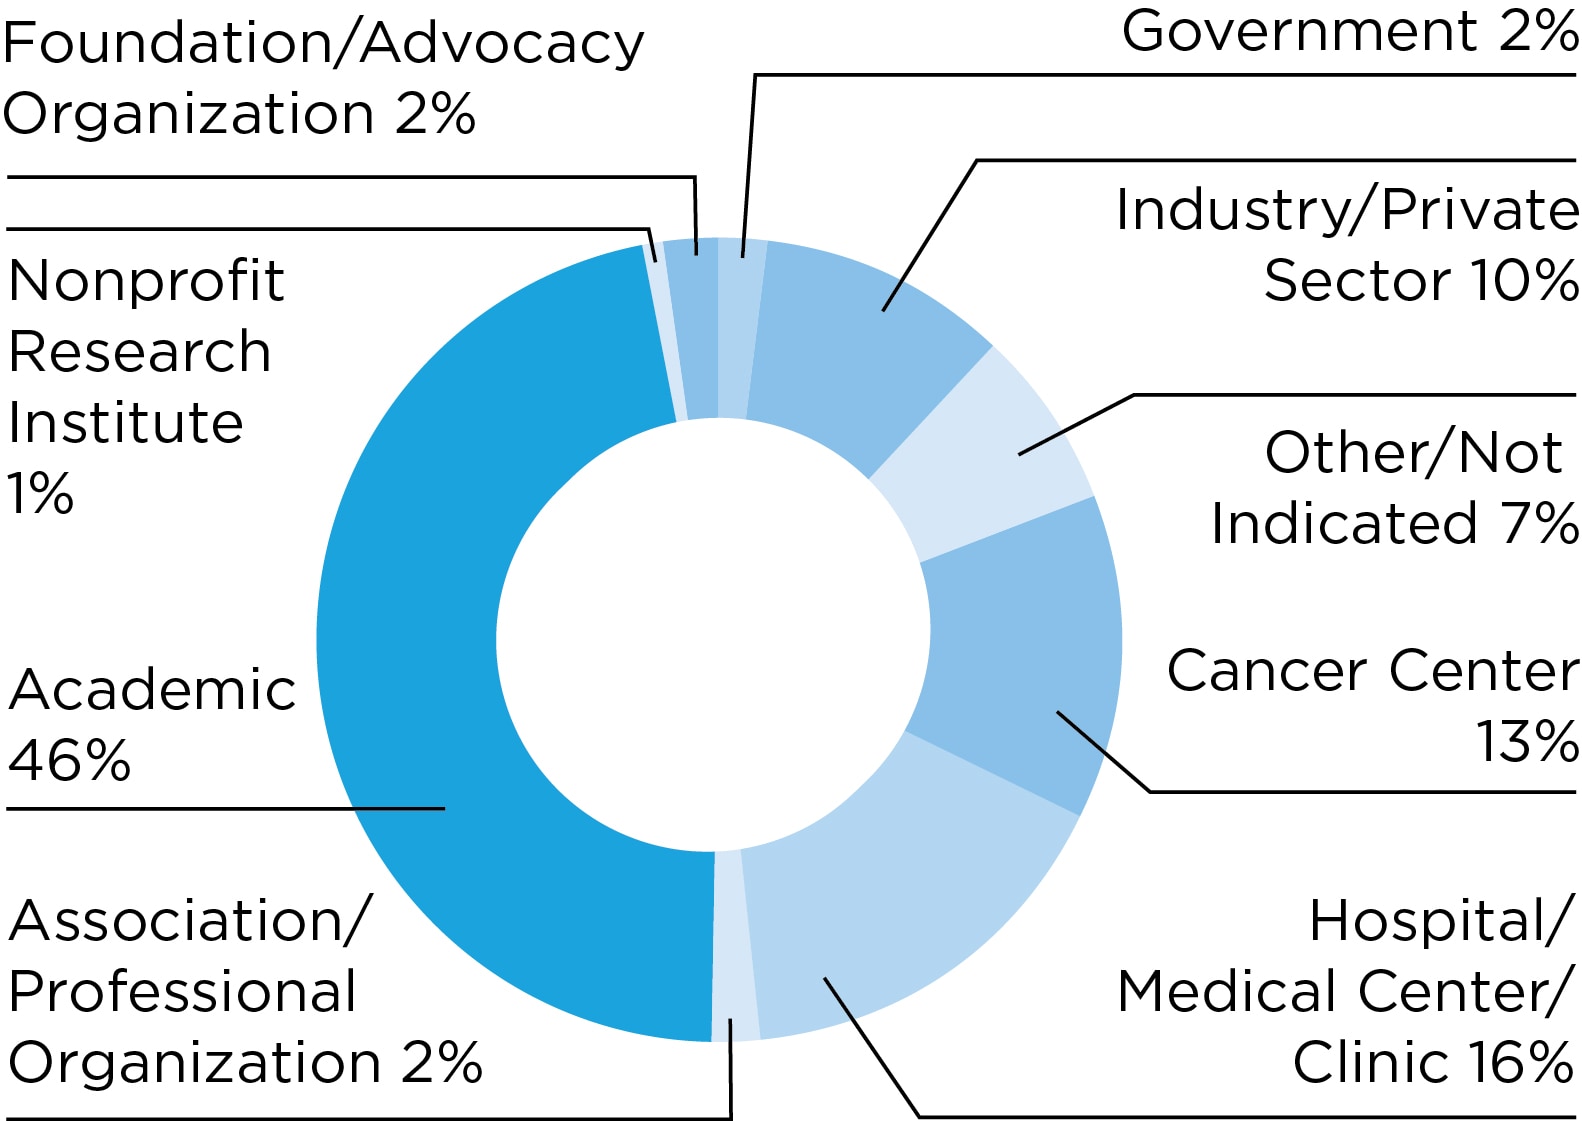 Chart: AACR members by work setting chart: academic, 46 percent; cancer center 13 percent; industry/private sector, 10 percent; hospital/medical center/clinic, 16 percent; foundation/advocacy organization, 2 percent; nonprofit research institute, 1 percent; association/professional organization, 2 percent; government, 2 percent; other/not indicated, 7 percent.